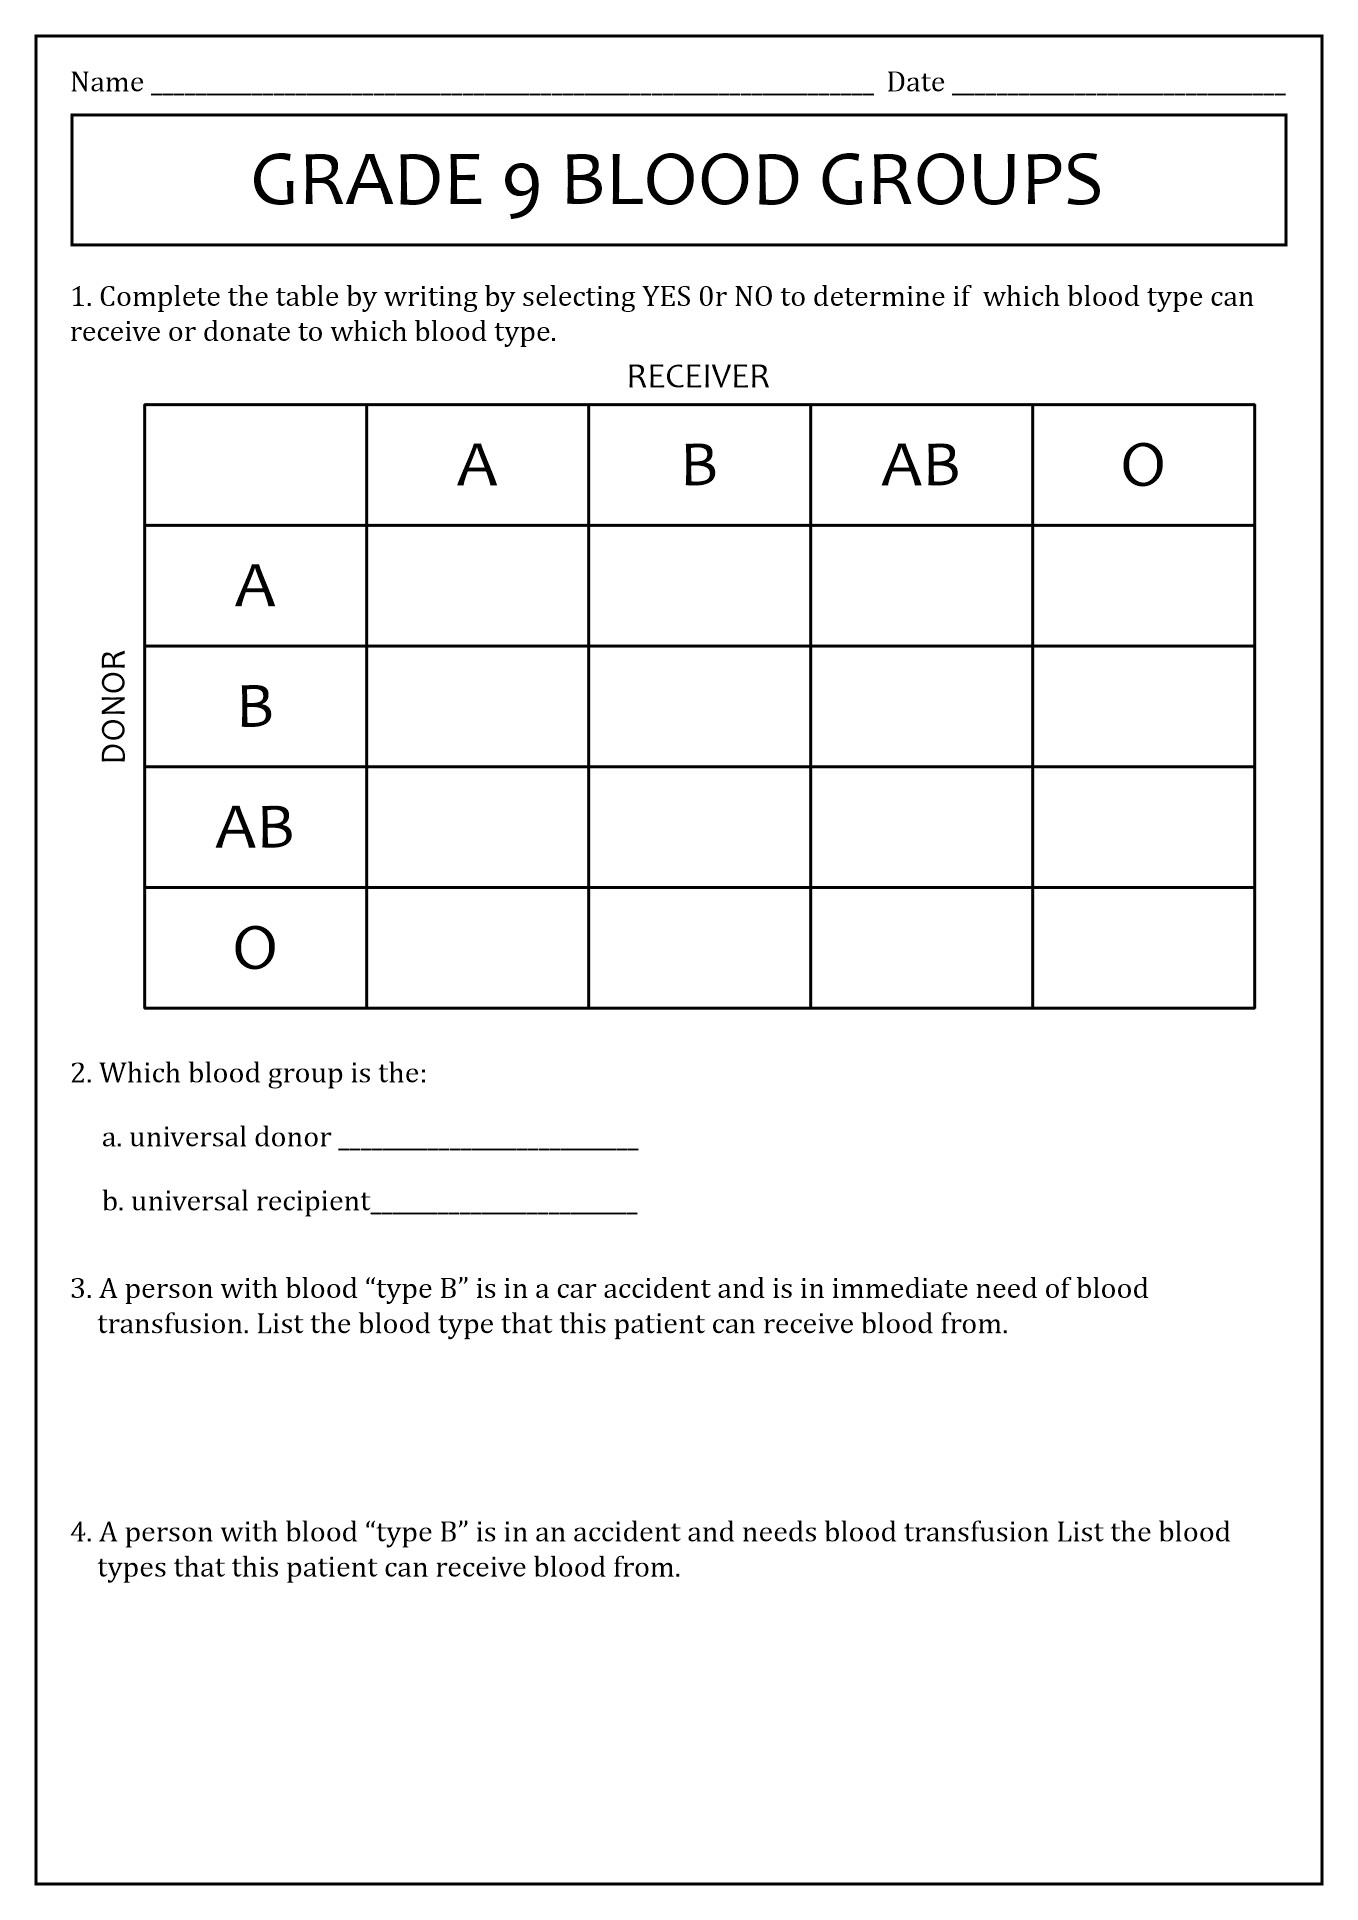 12-best-images-of-science-worksheets-all-cells-7th-grade-life-science-worksheets-biology-cell